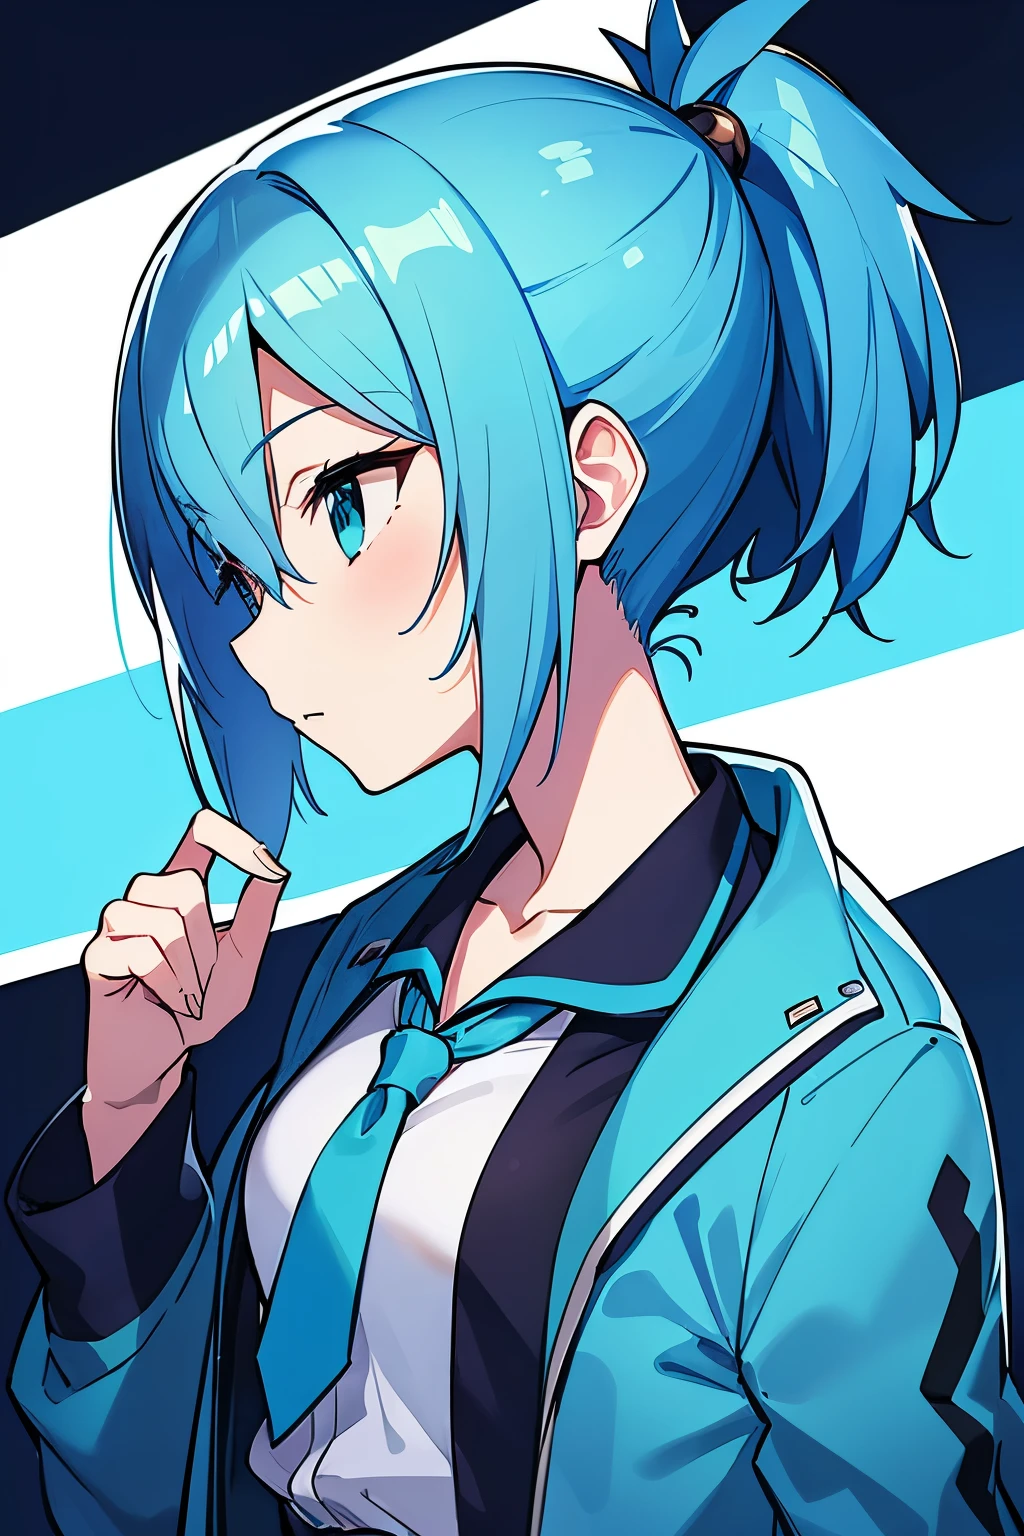 Drawing of a girl with blue hair and a blue jacket, rimuru, 2 d anime style, profile shot of rimuru tempest, rimuru tempest, 2 D Anime, Fubuki, full face shot of rimuru tempest, short hair, Anime girl with teal hair, 2d art, 2 d art, Ponytail Girl, Blue tie, White shirt, Indigo Jacket, Brown belt at waist,she wear blue jeans.